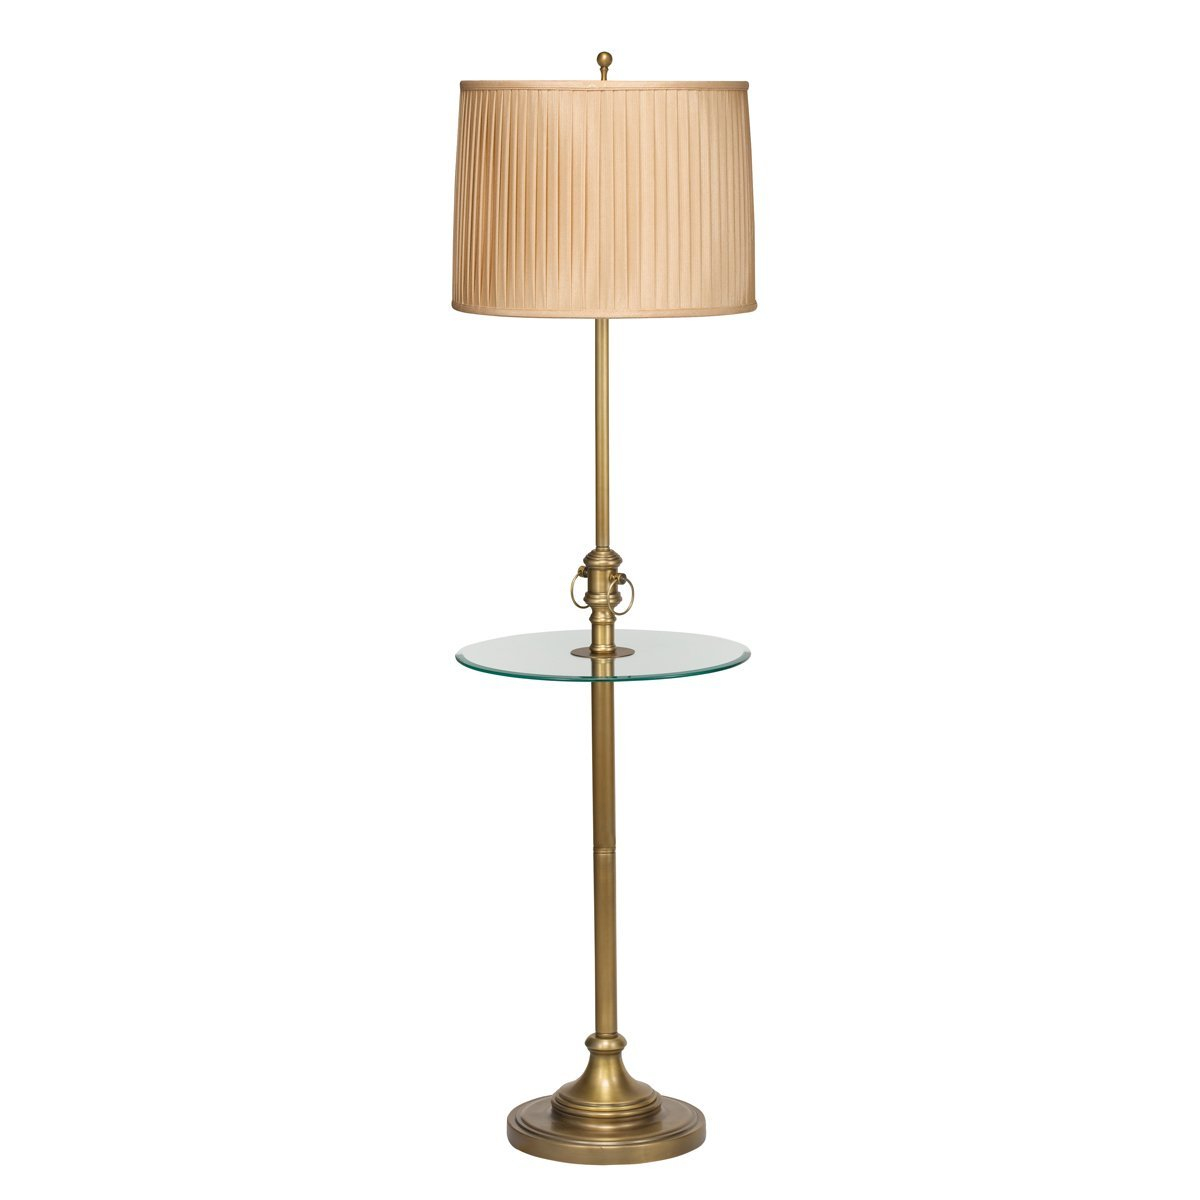 End Table With Lamp Attached Floor Table Lamps Attached regarding dimensions 1200 X 1200